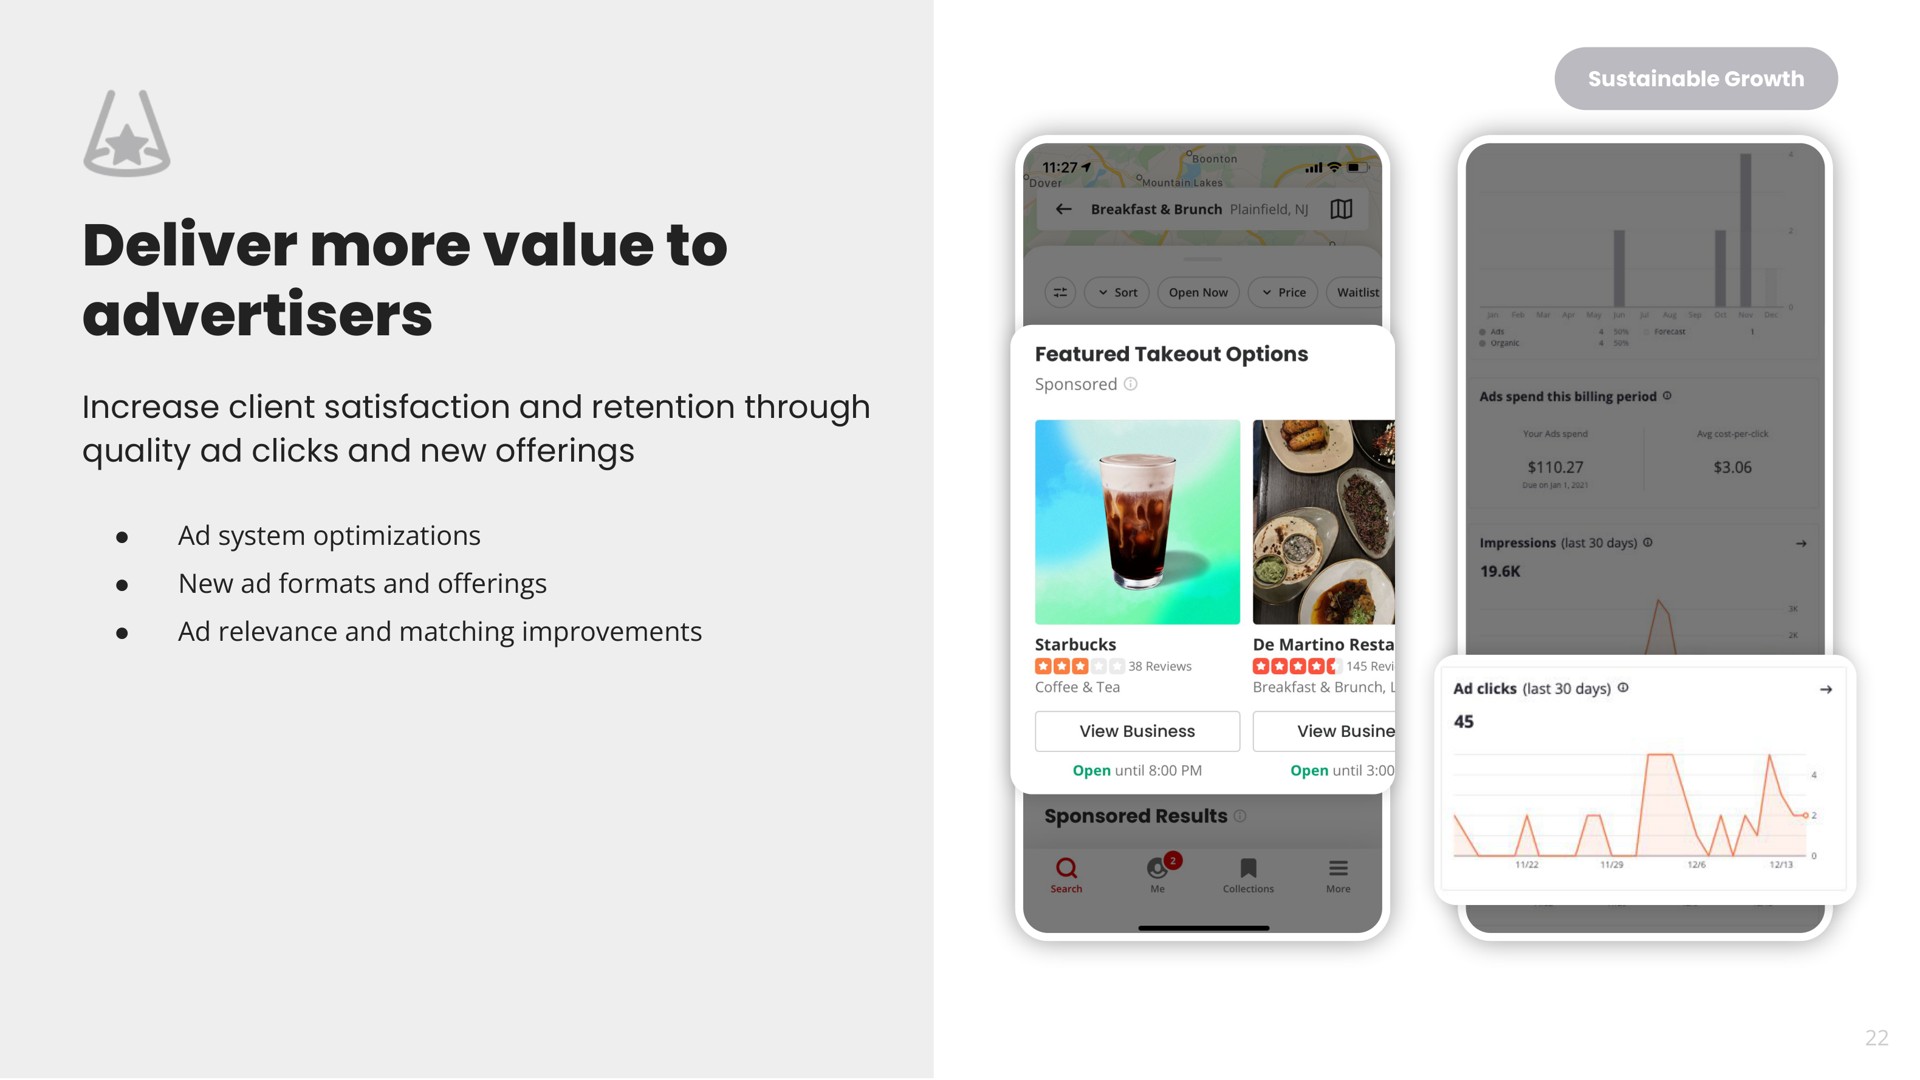 deliver more value to advertisers | Yelp